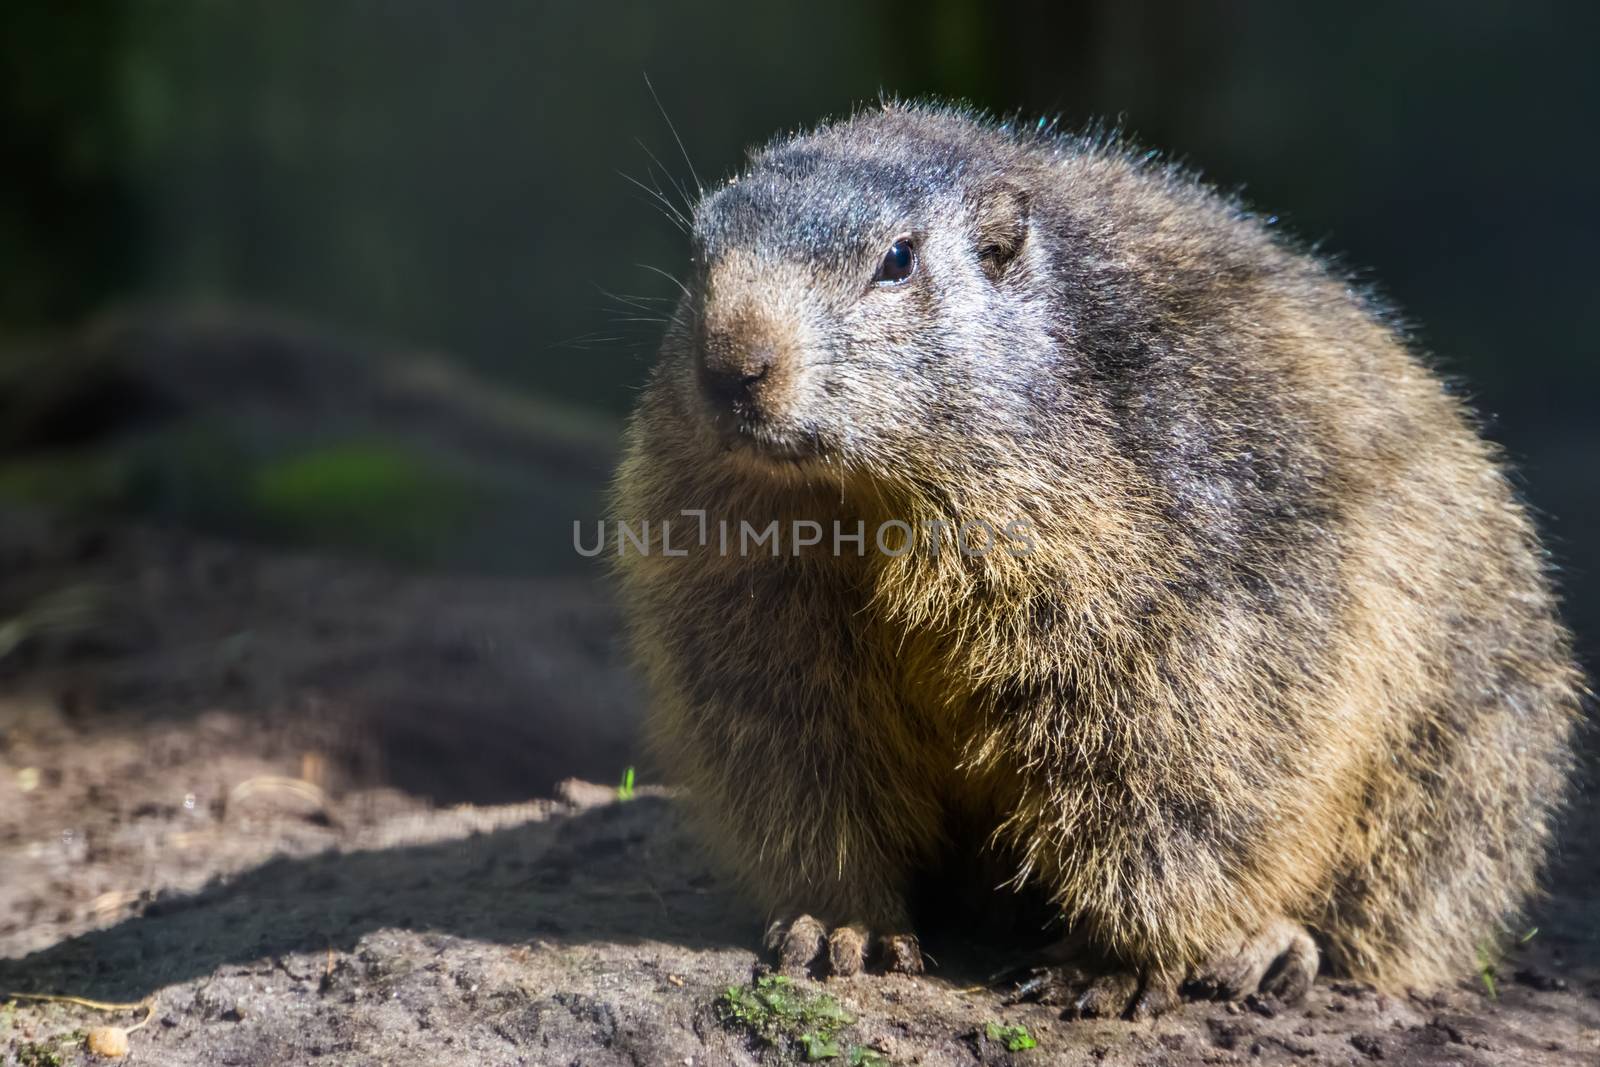 closeup portrait of an alpine marmot, rodent specie, wild squirrel from the alps of europe by charlottebleijenberg